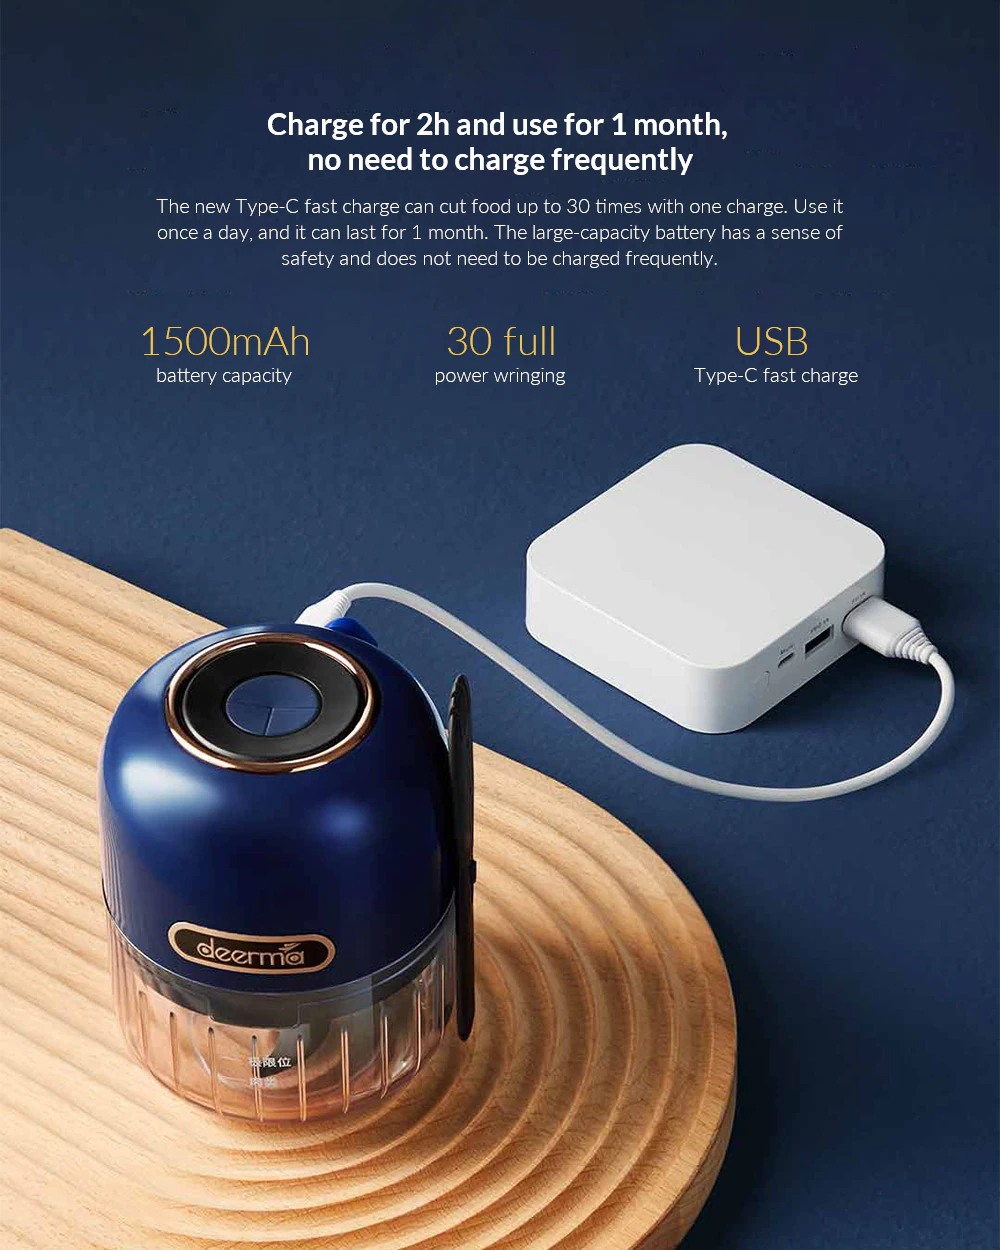 Charge for 2h and use for 1 month, no need to charge frequently The new Type-C fast charge can cut food up to 30 times with one charge. Use it once a day, and it can last for 1 month. The large-capacity battery has a sense of safety and does not need to be charged frequently.